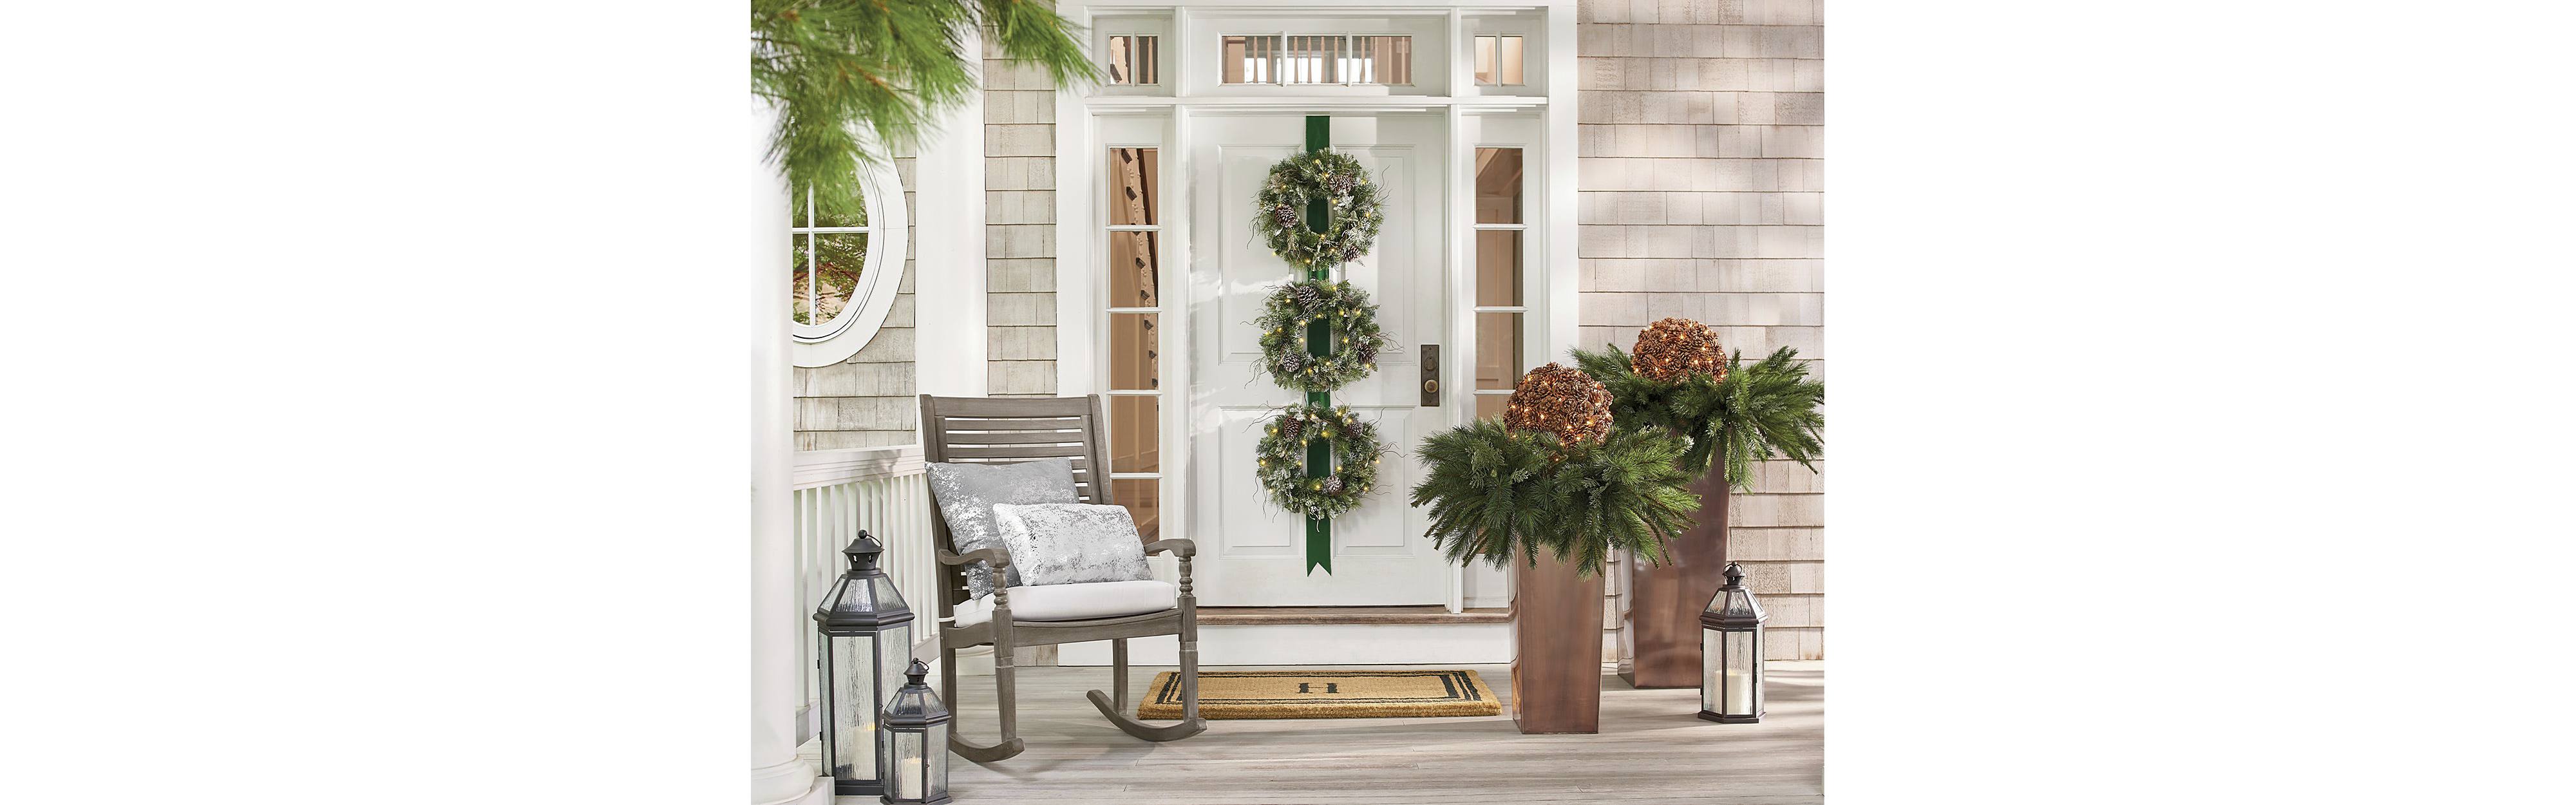 Christmas Porch Decorations: 15 Holly Jolly Looks - Grandin Road Blog